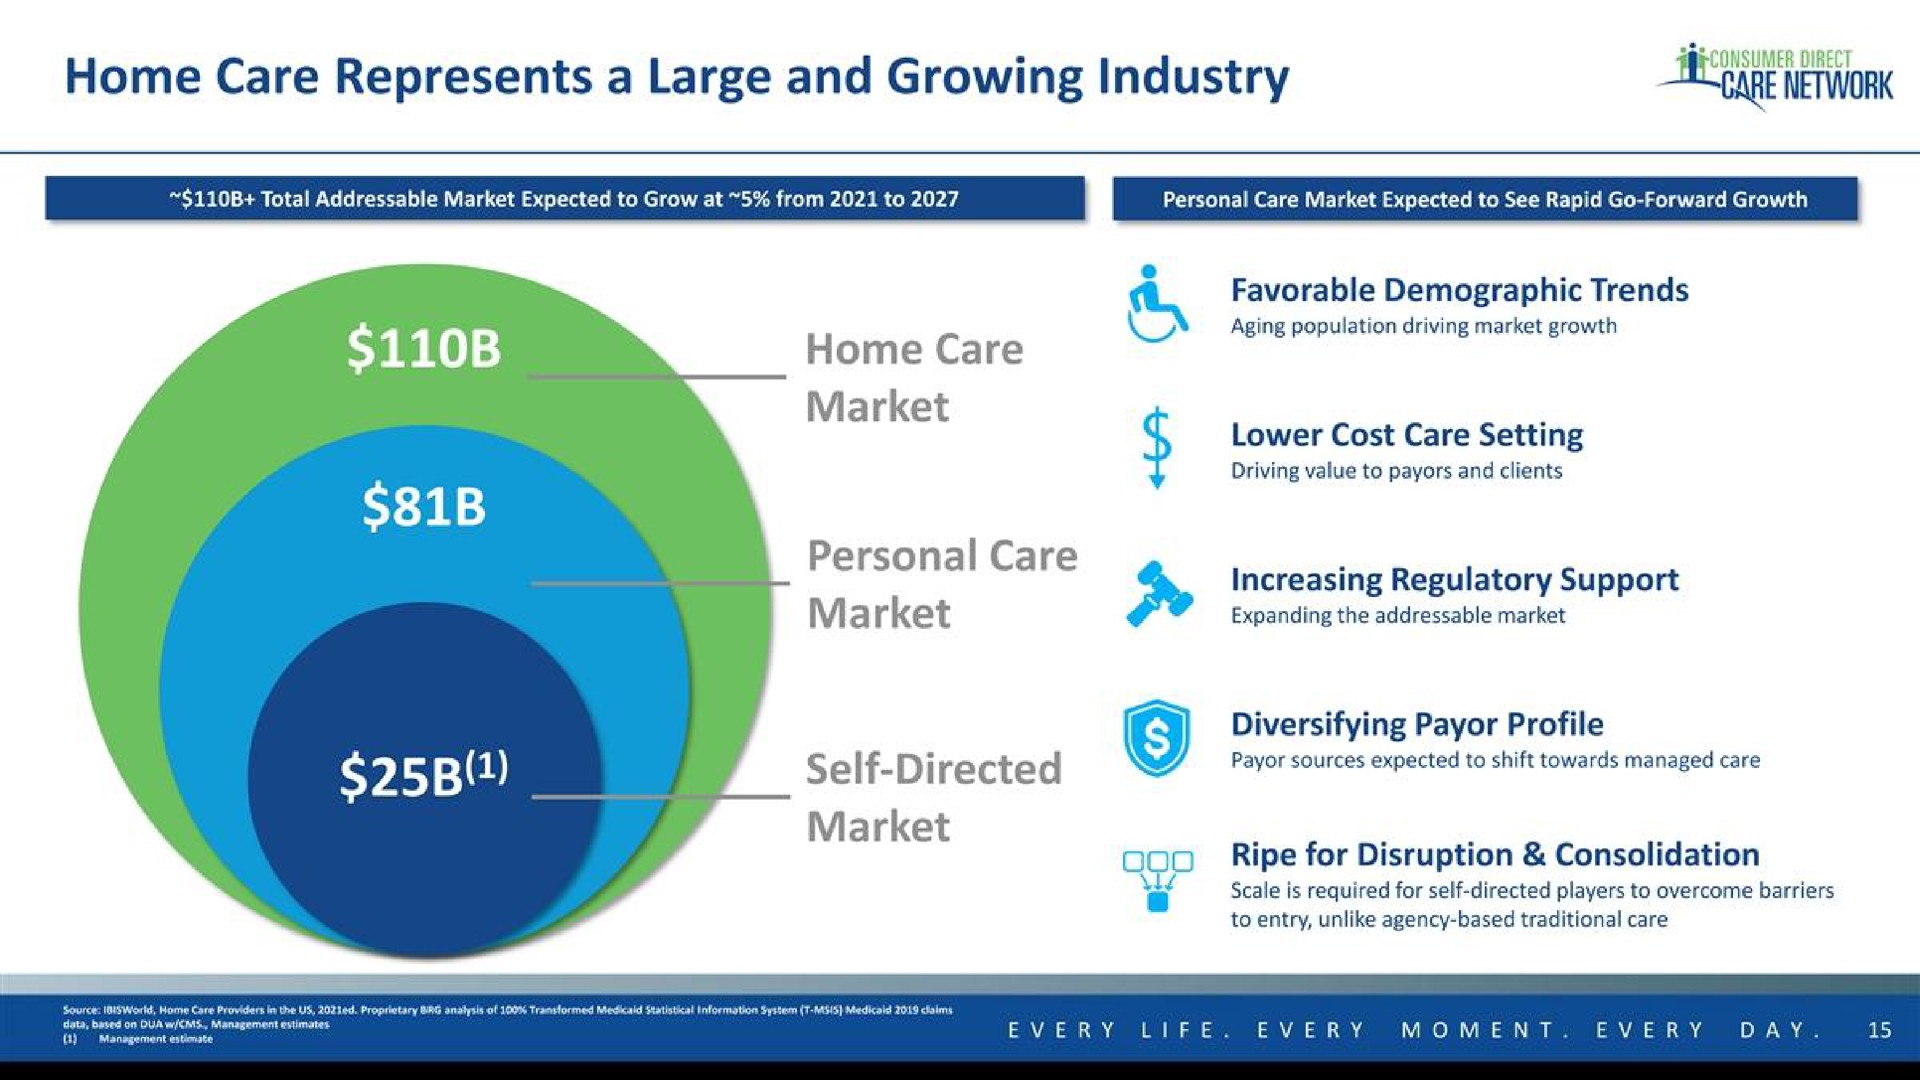 home care represents a large and growing industry acre network | Consumer Direct Care Network